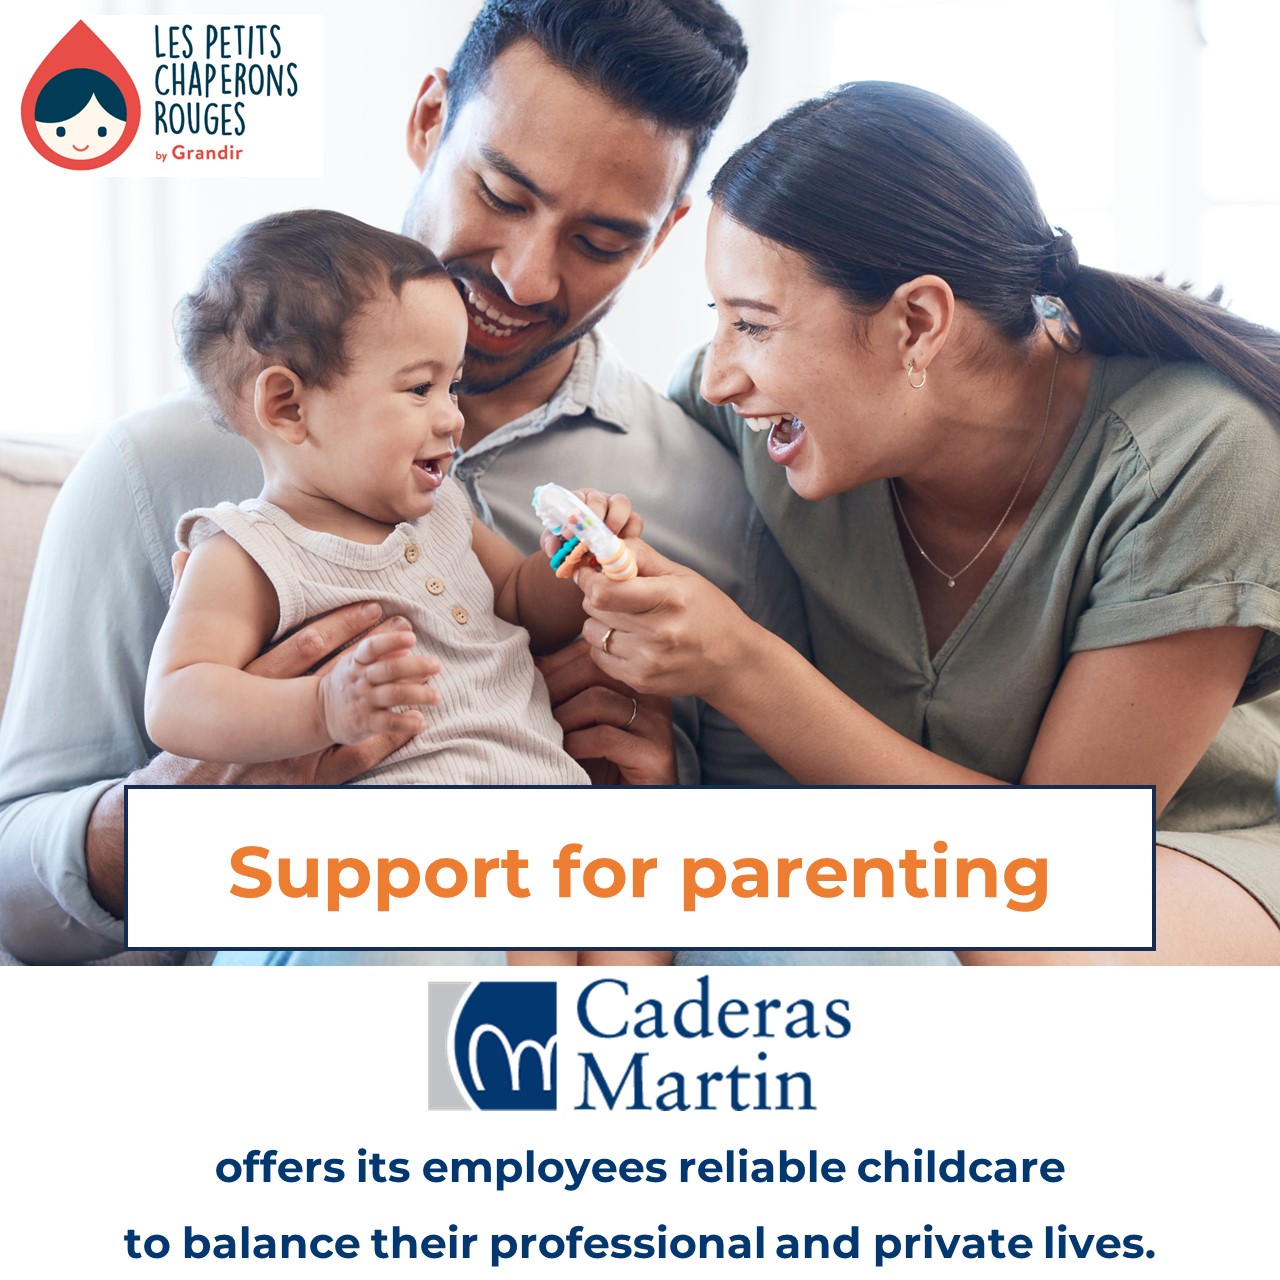 Day nursery Caderas Martin facilitates access to reliable, local childcare for its employees